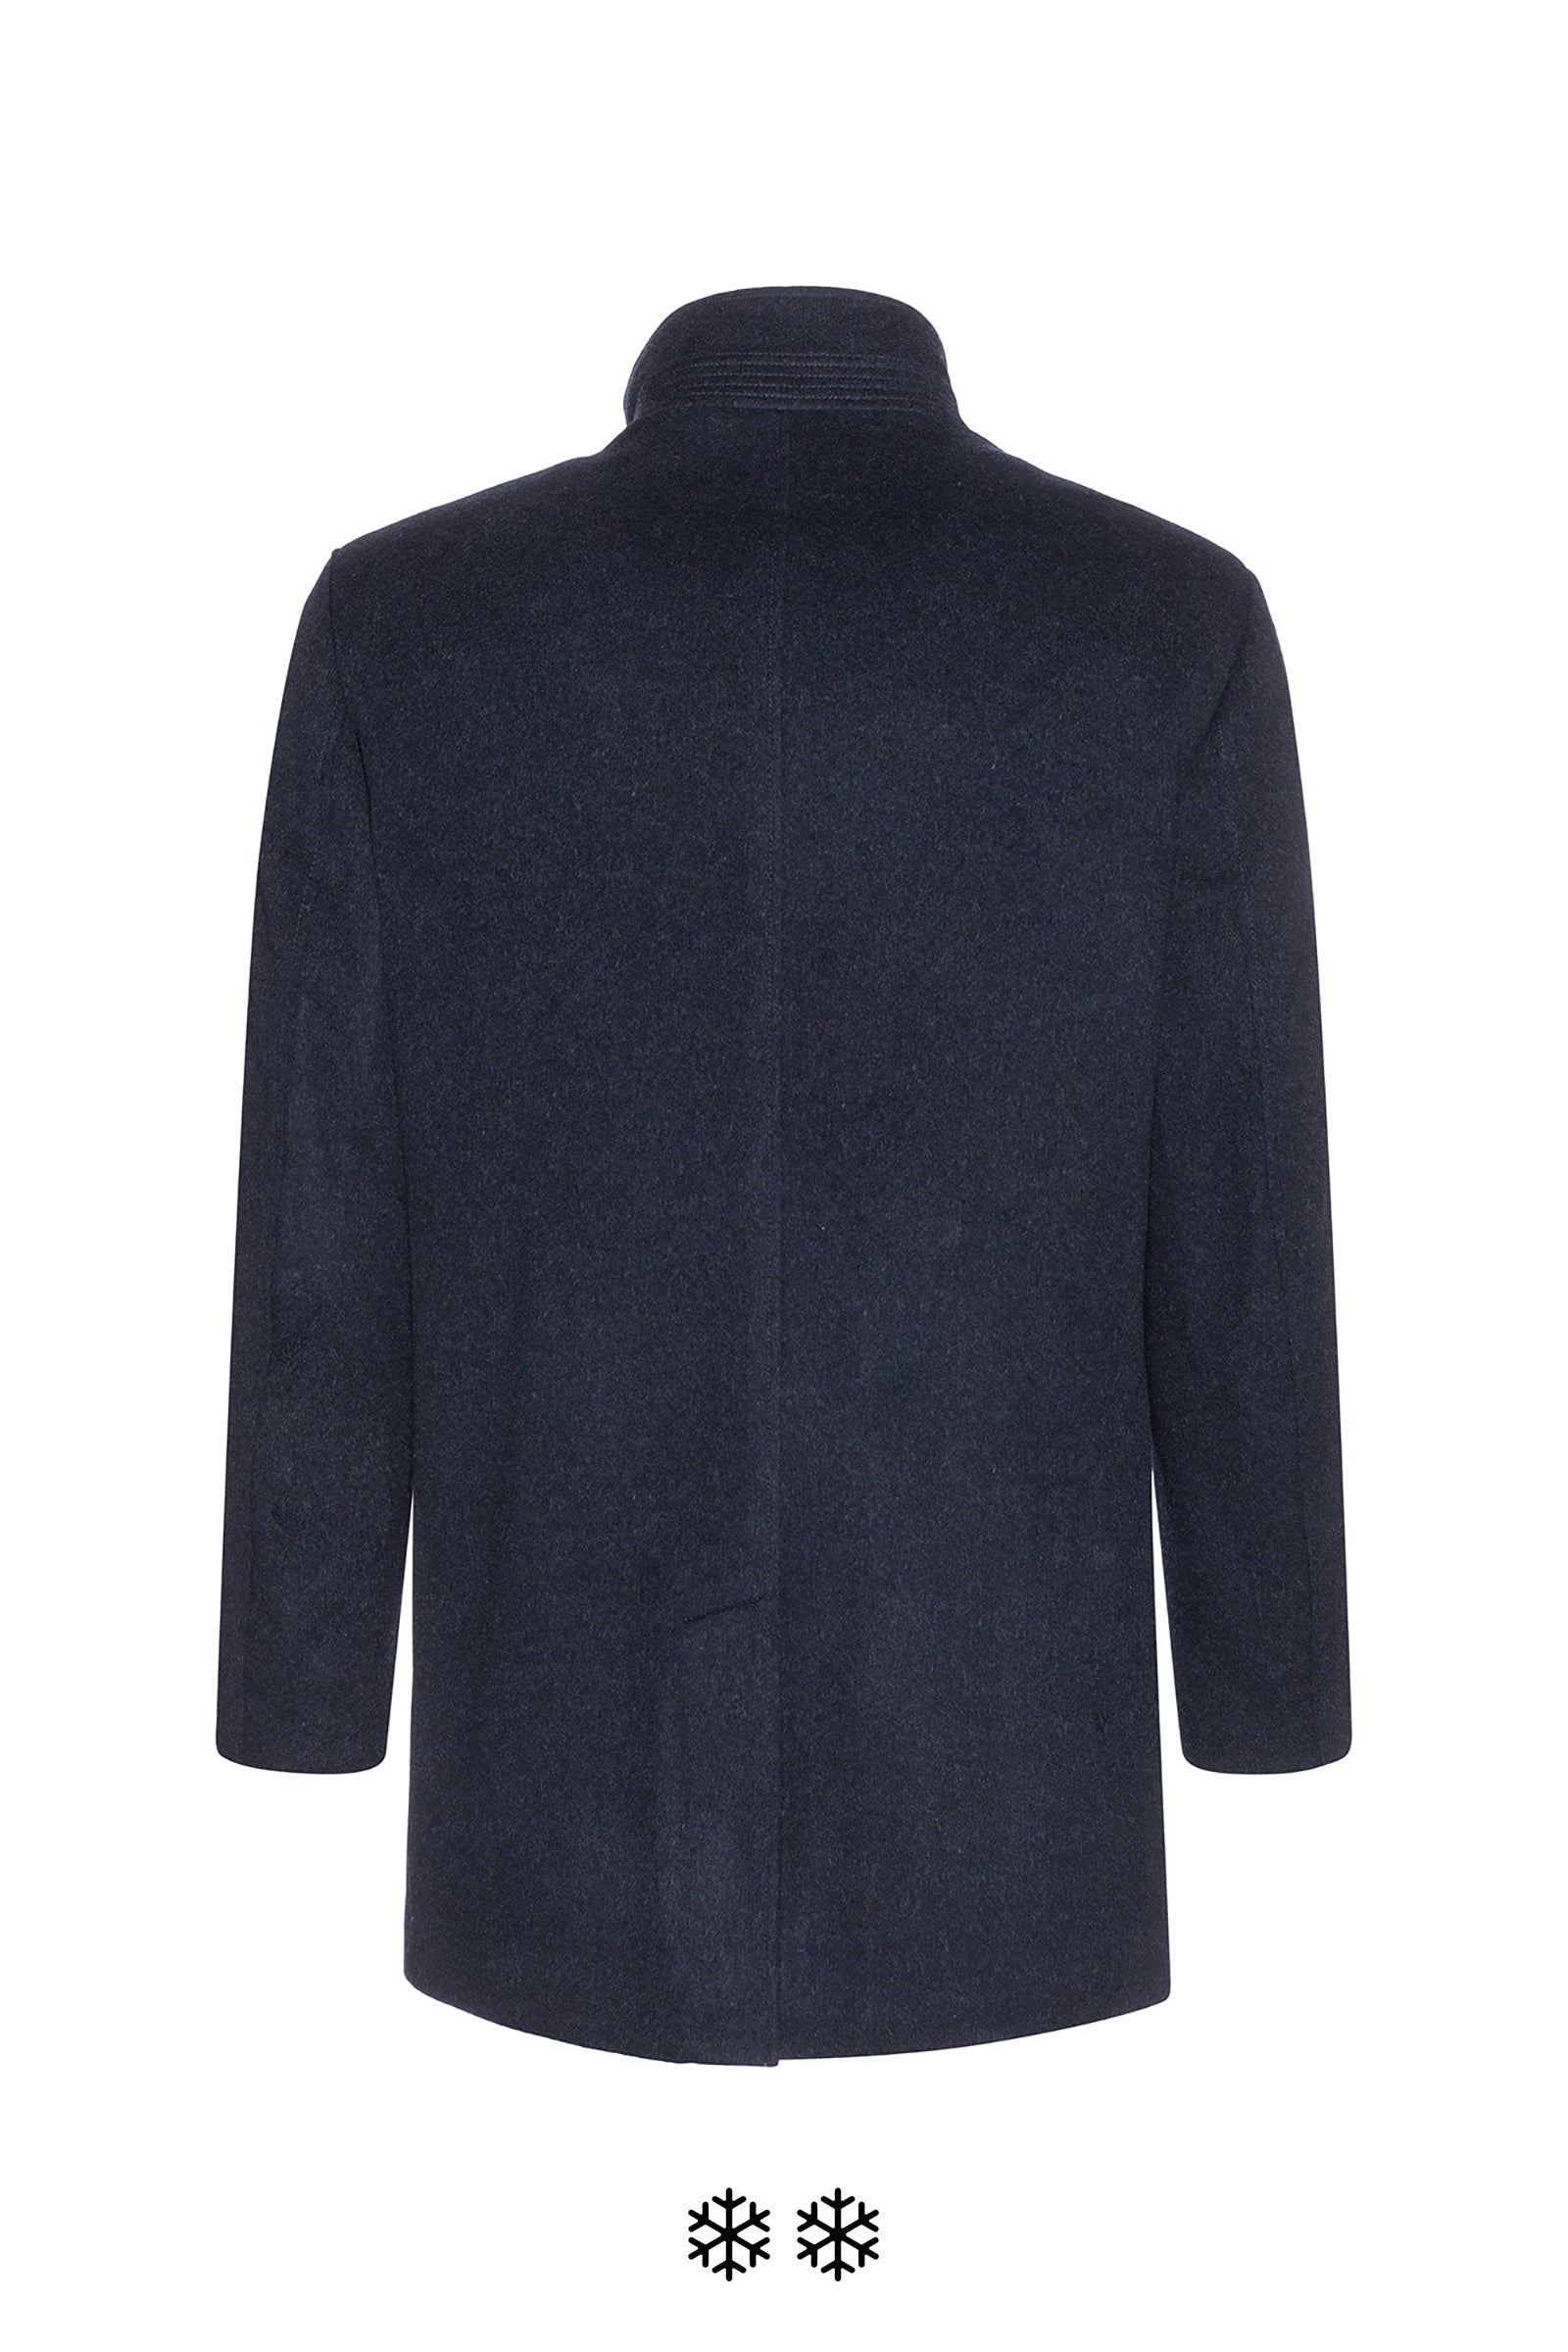 navy melange wool and cashmere topcoat 34 inch length